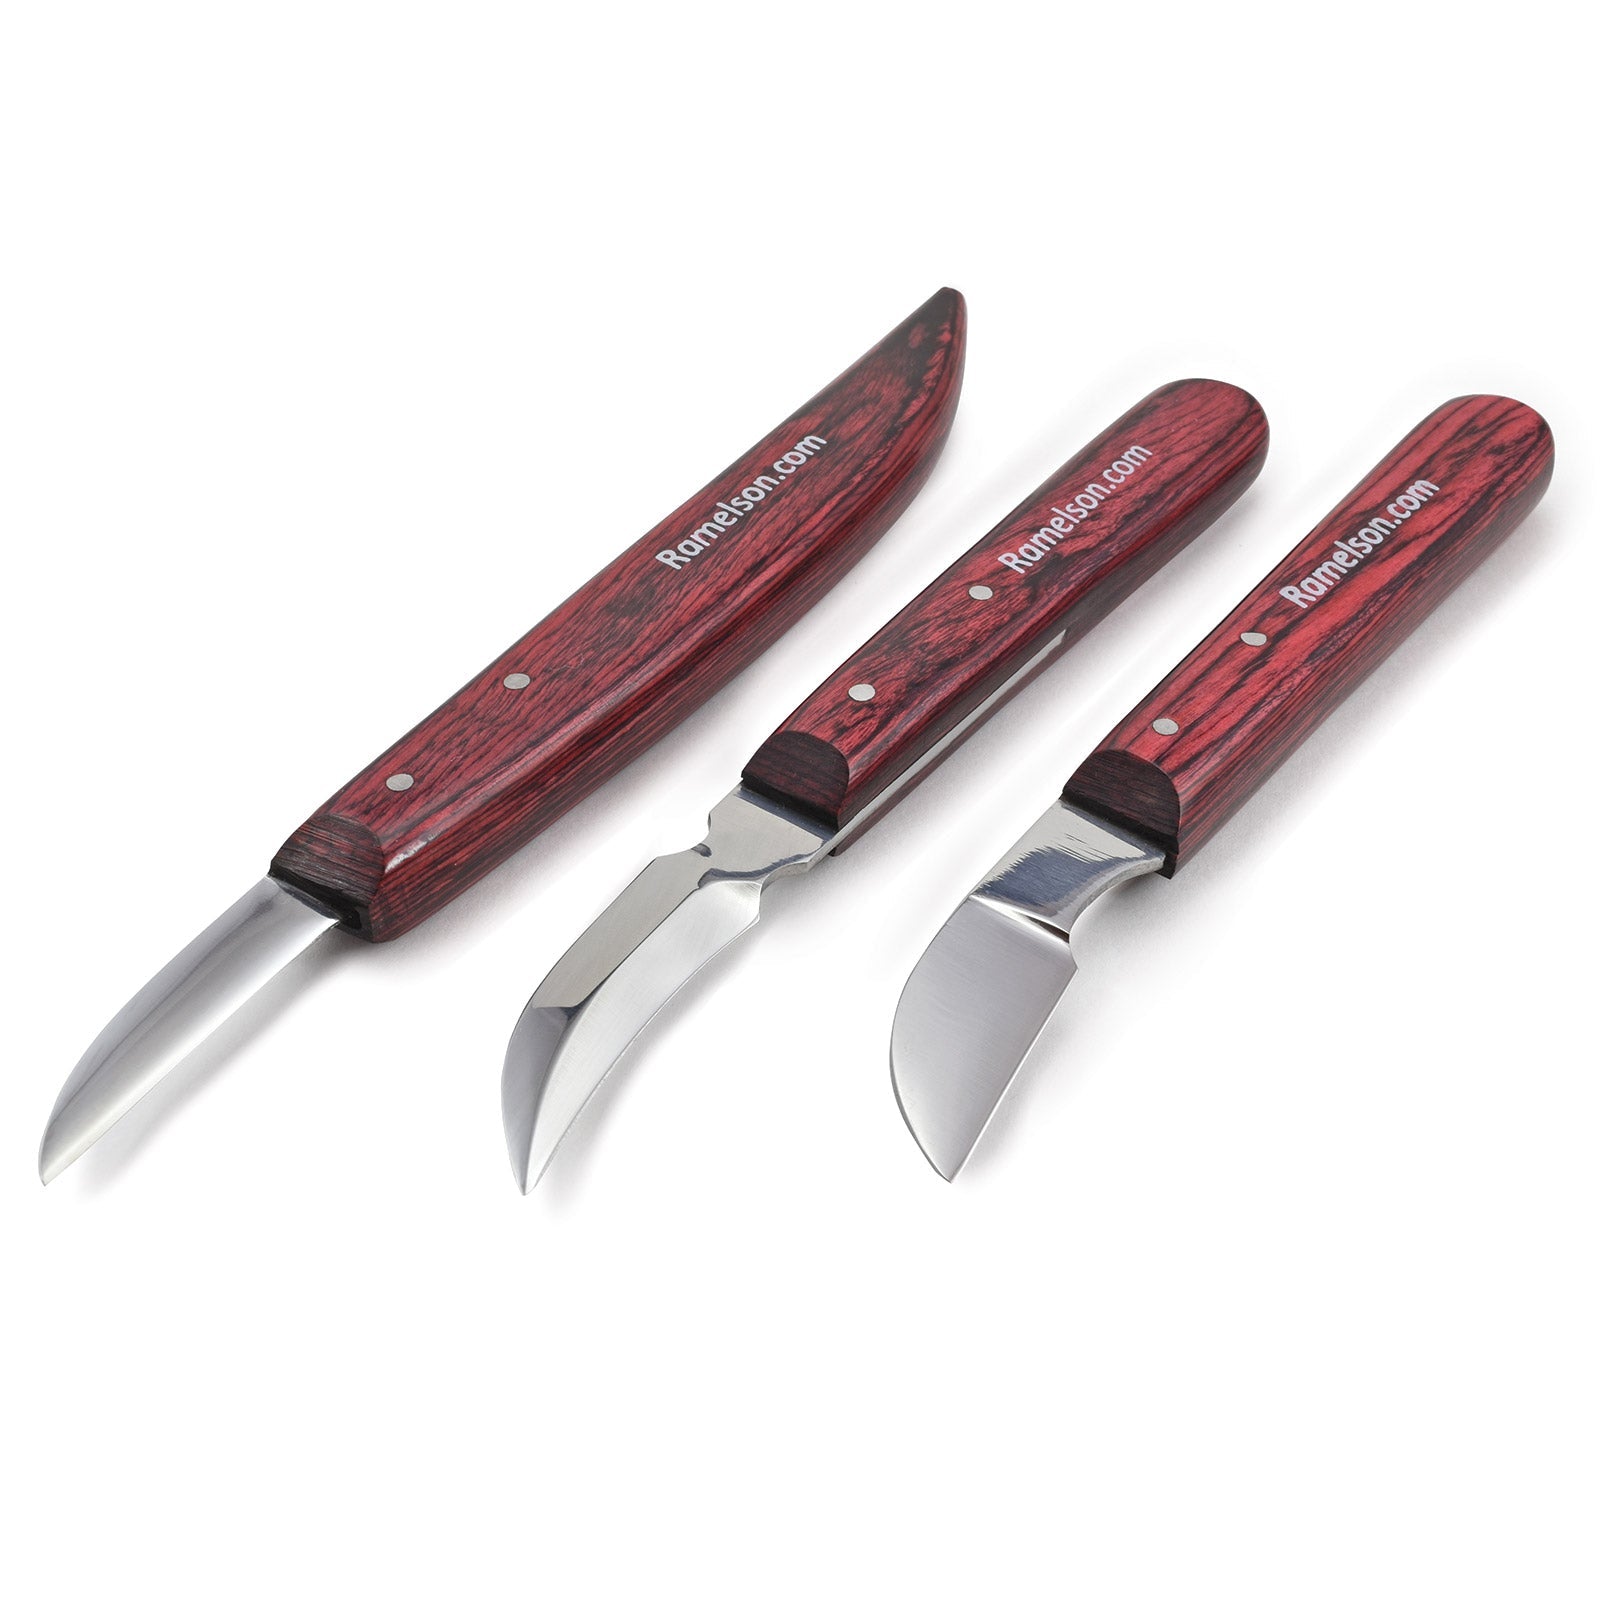 3 - piece Roughing Whittling and Chip Wood Carving Knife Set - Micro - Mark Carvers